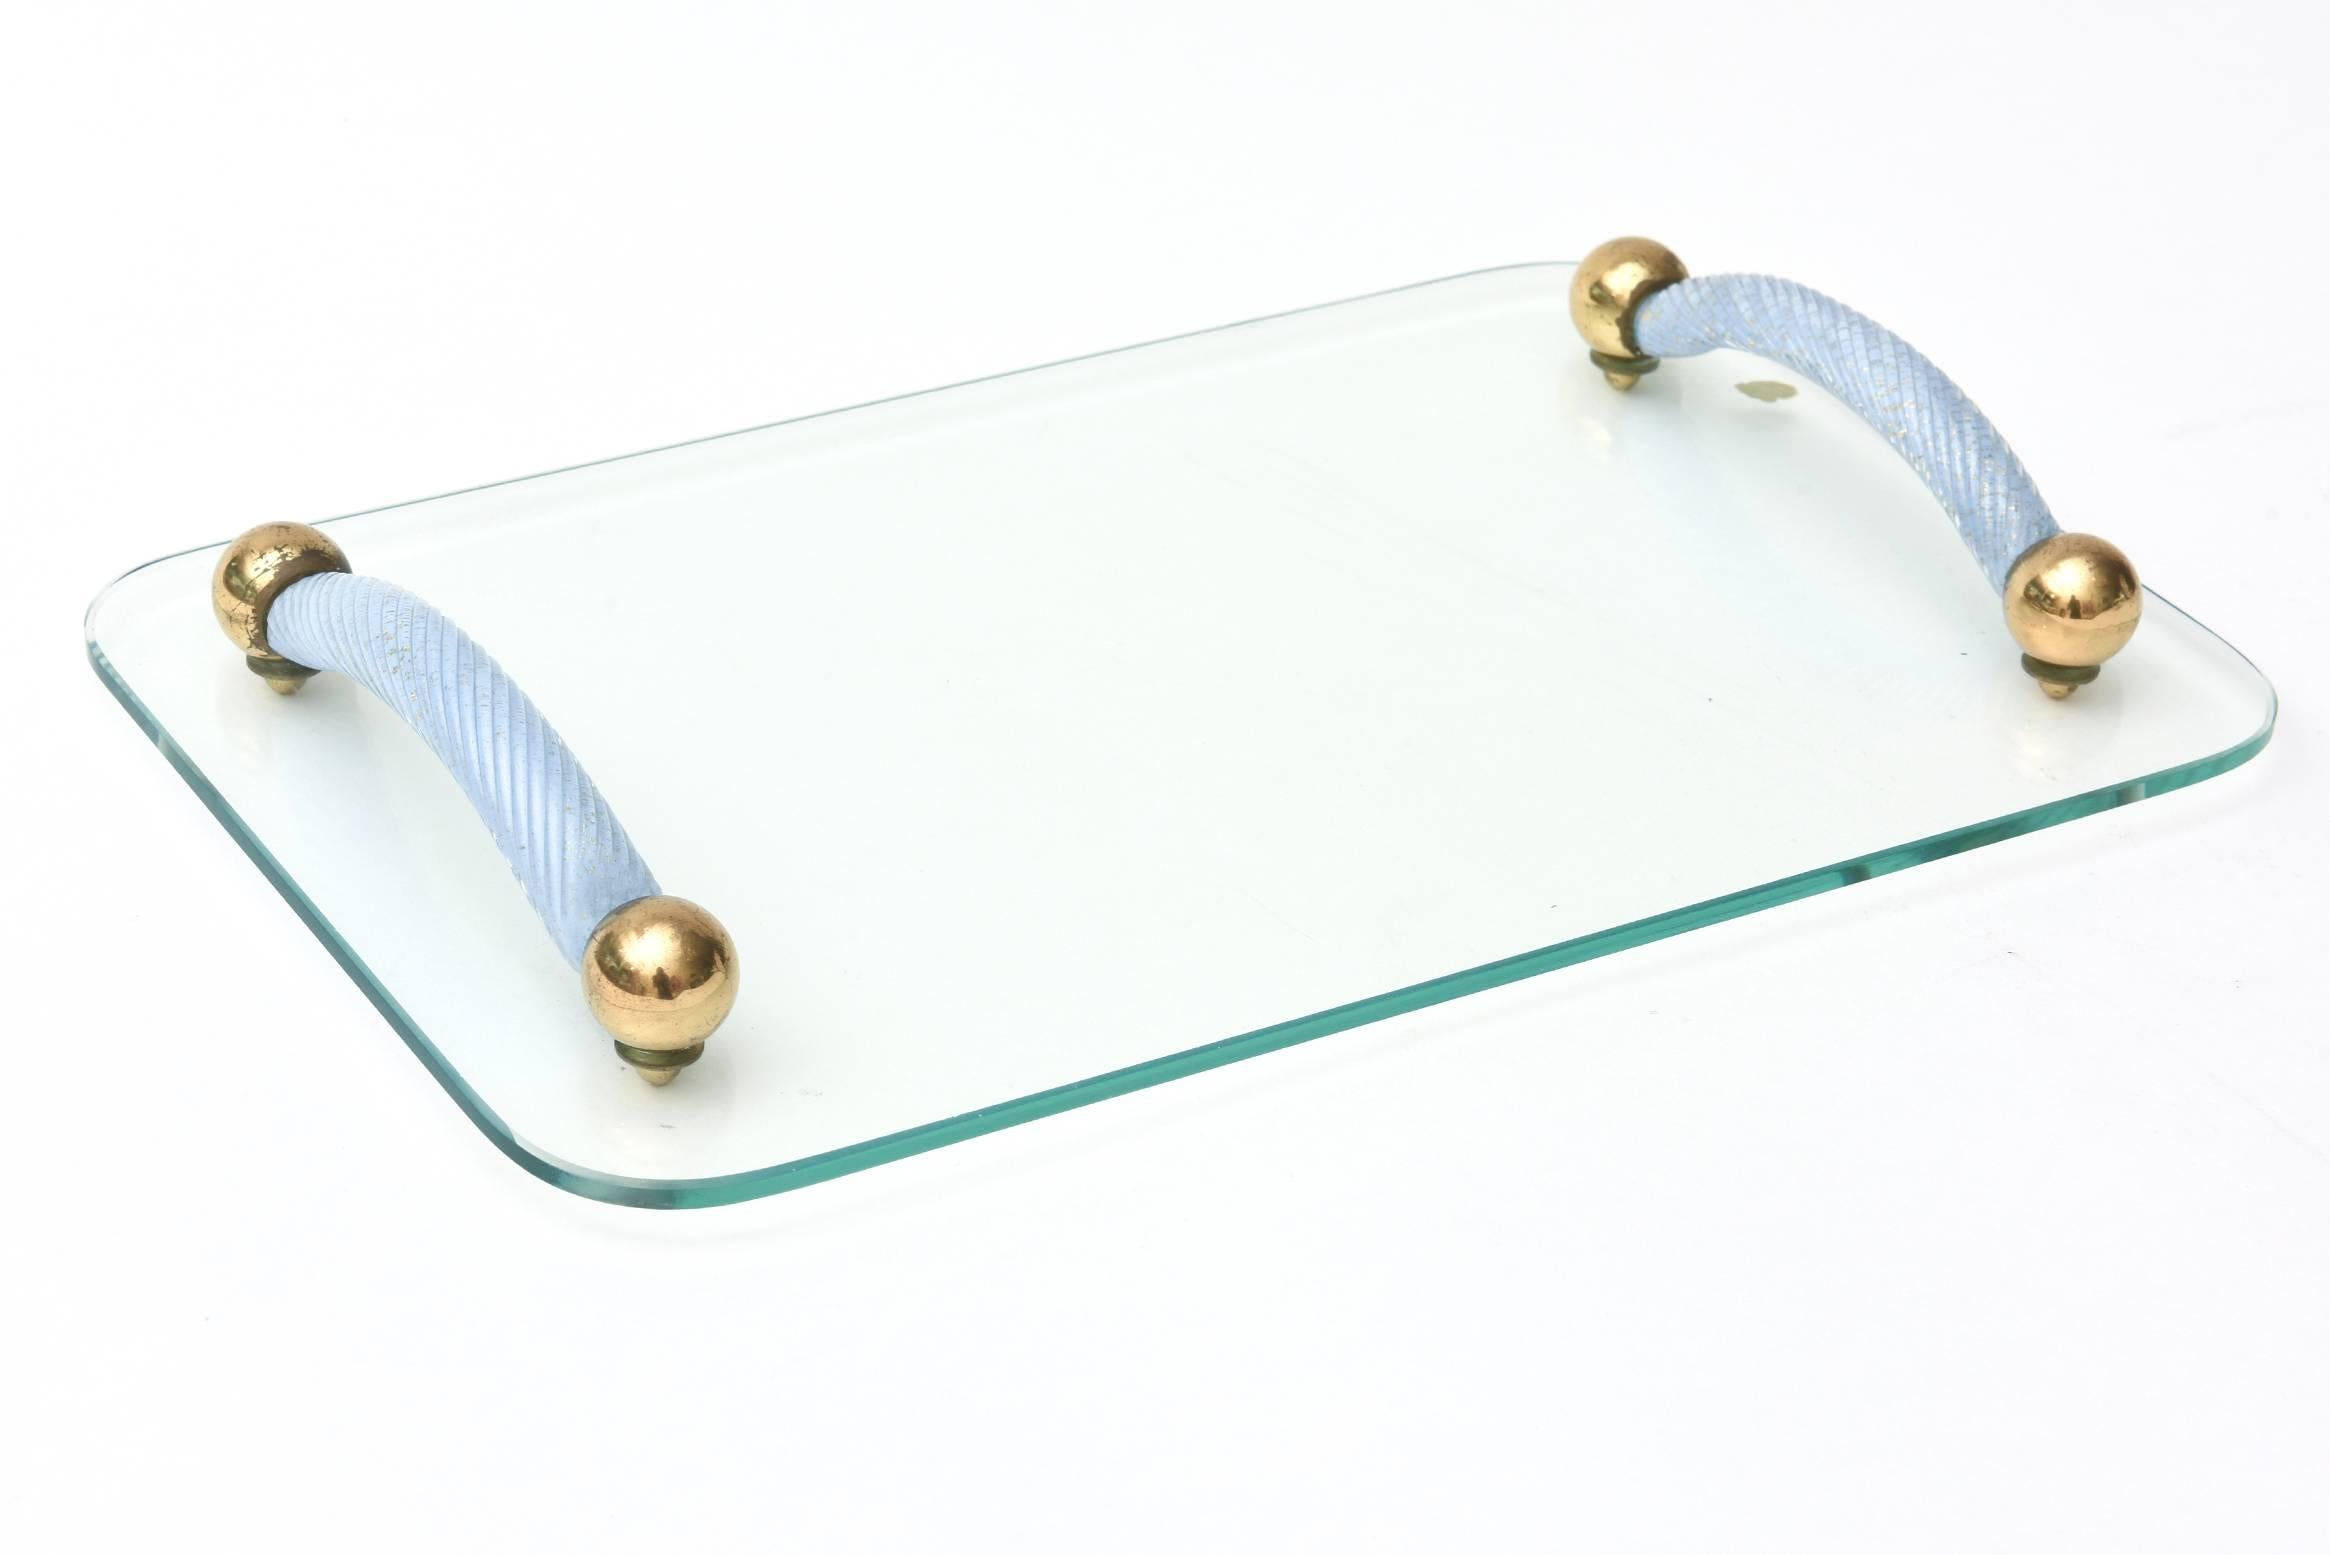 This lovely and versatile Italian Murano glass tray attributed to Seguso has the original label; albeit only half intact on the back. The beautiful gold aventurine is encased in the periwinkle blue raised and spun twisted glass handles. The interior